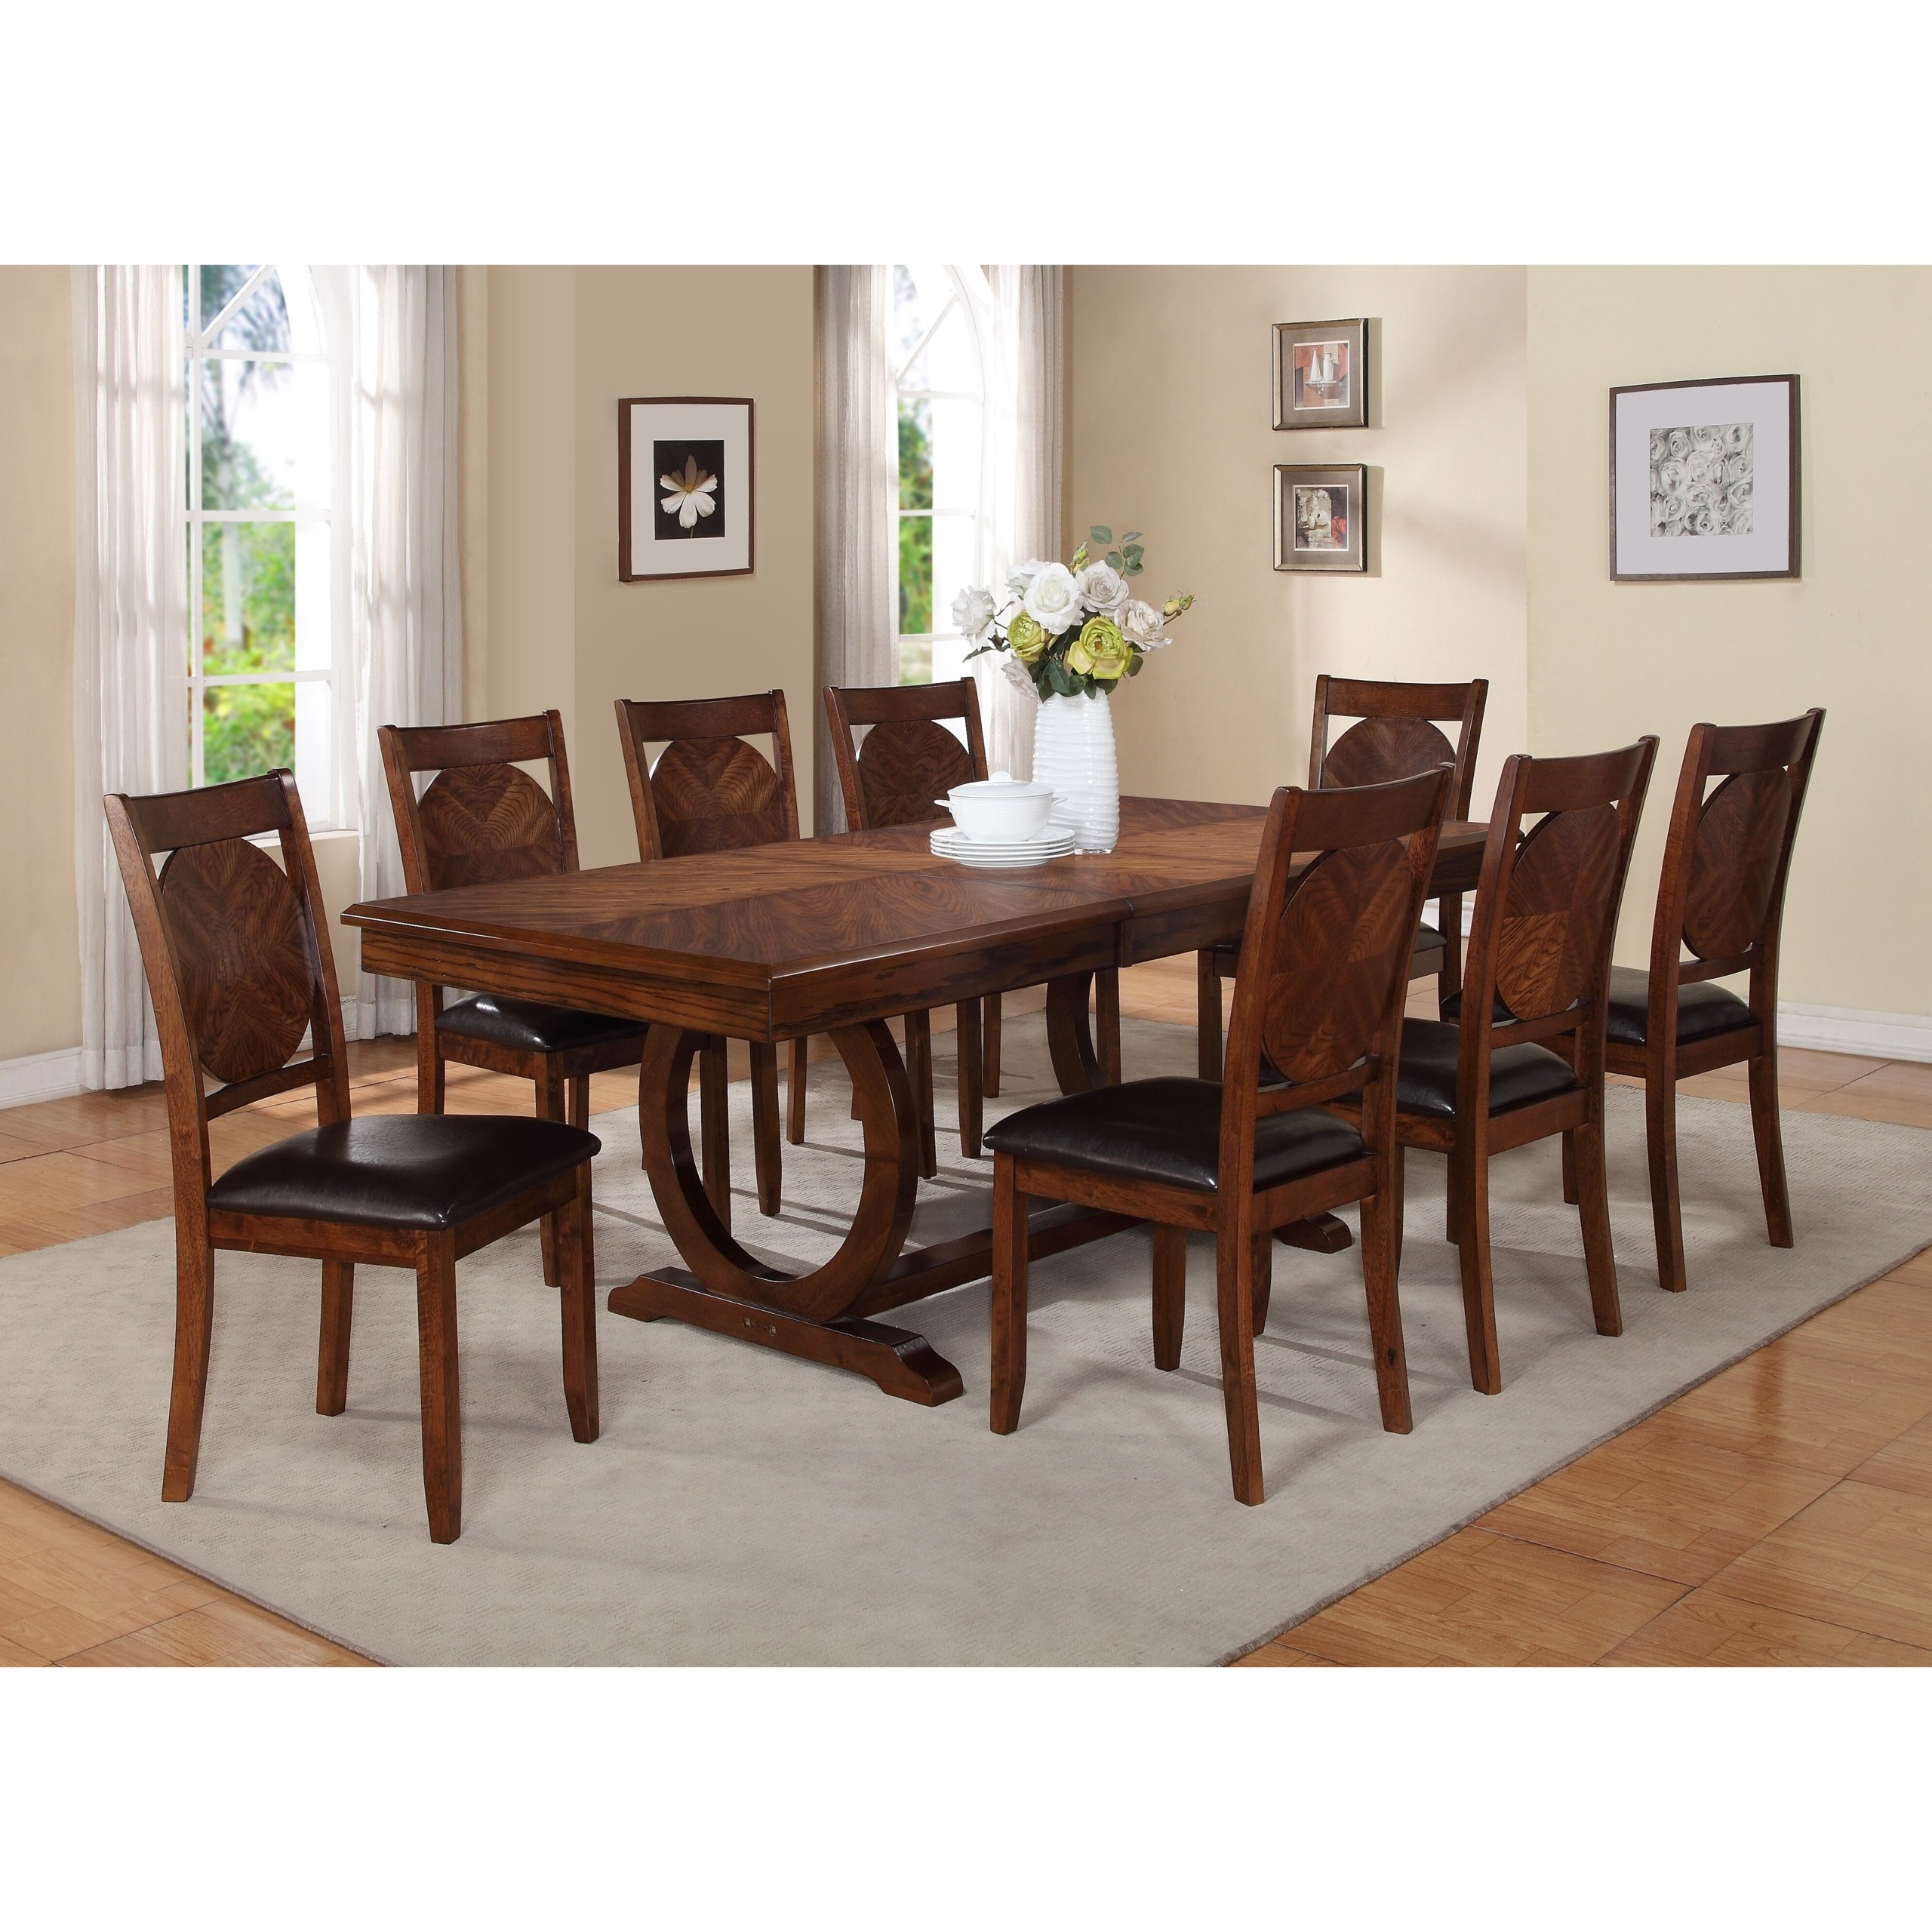 Round Dining Table With Butterfly Leaf - Ideas on Foter